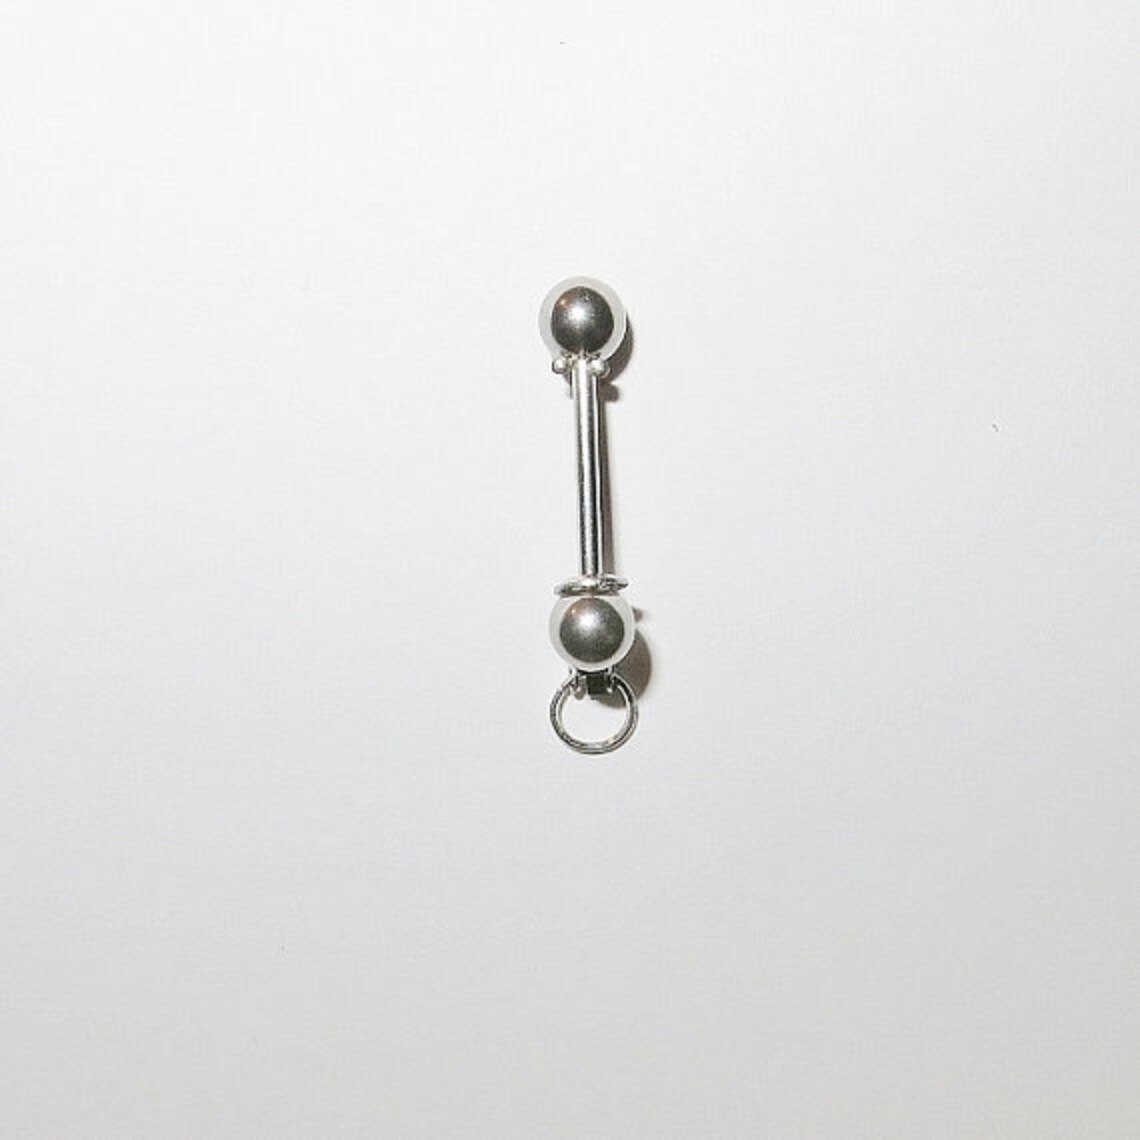 Pierced Nipple Jewelry And Vch Piercing Jewelry Or Nonpiercing Etsy